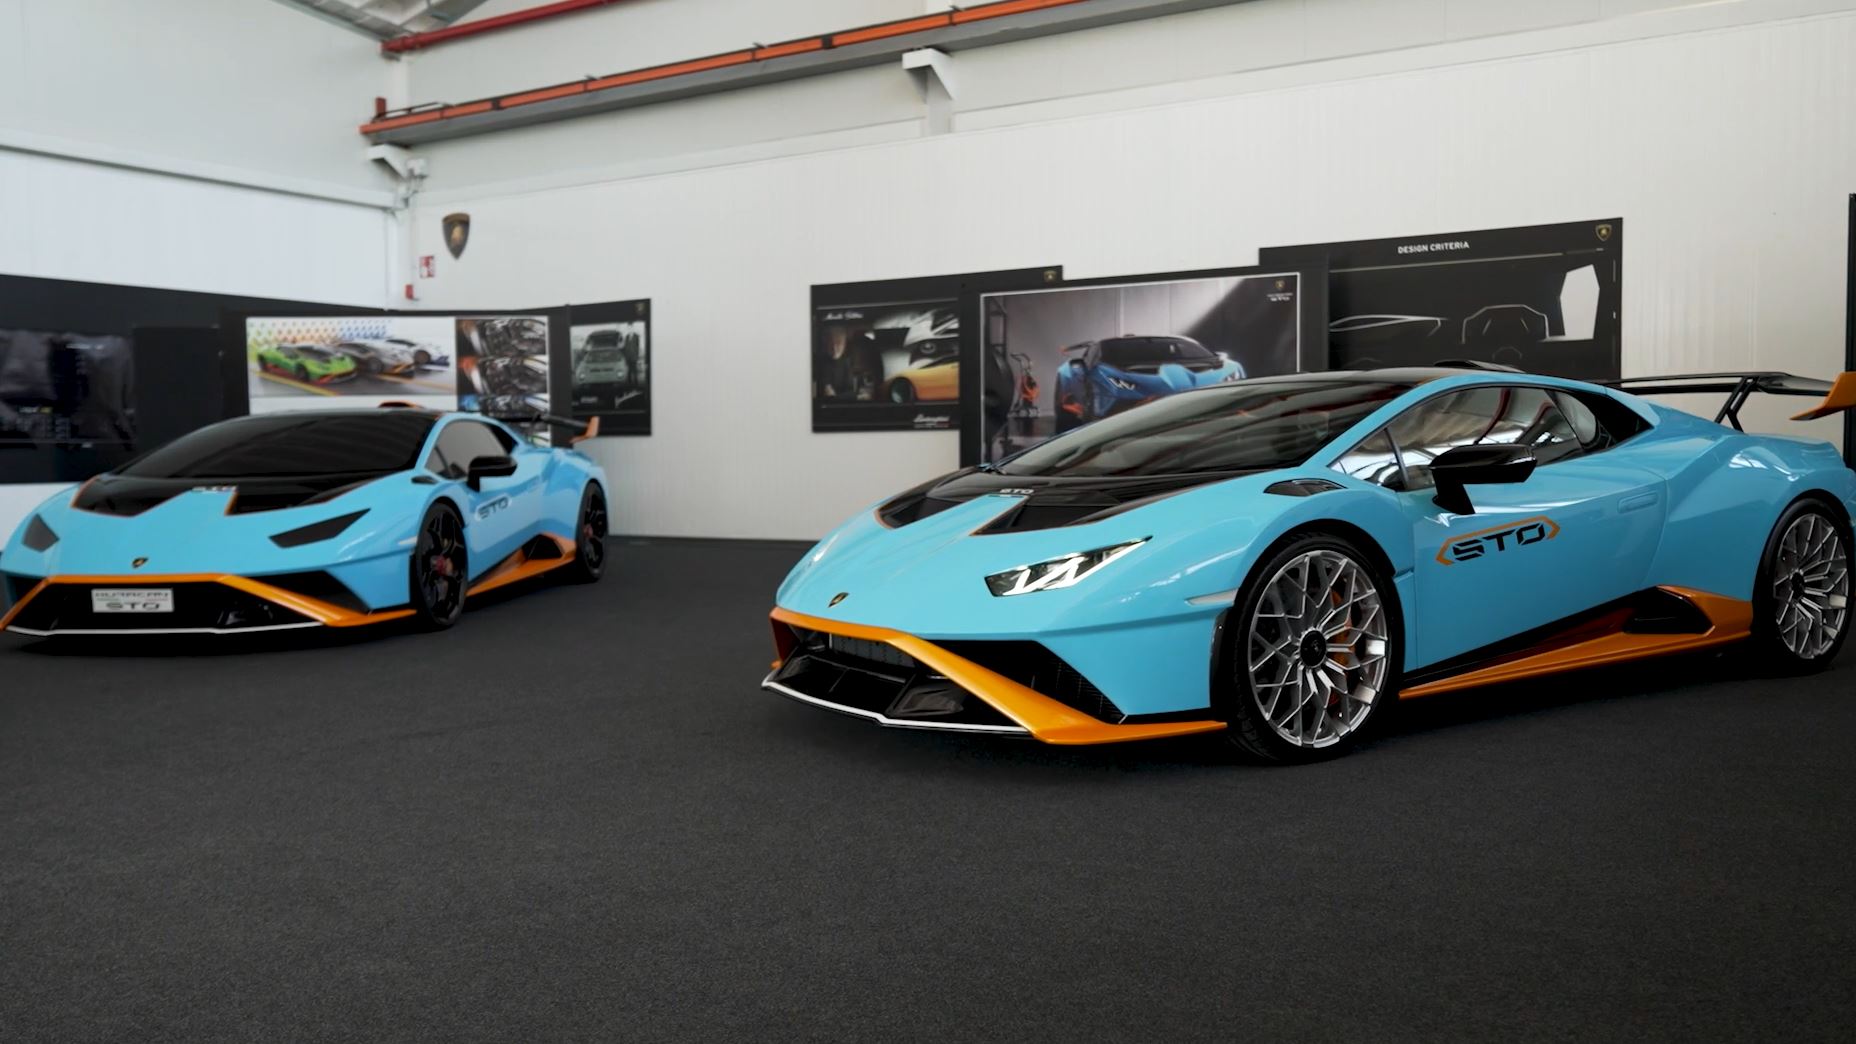 Automobili Lamborghini takes part in the 18th edition of the Autostyle Design Competition - Image 7